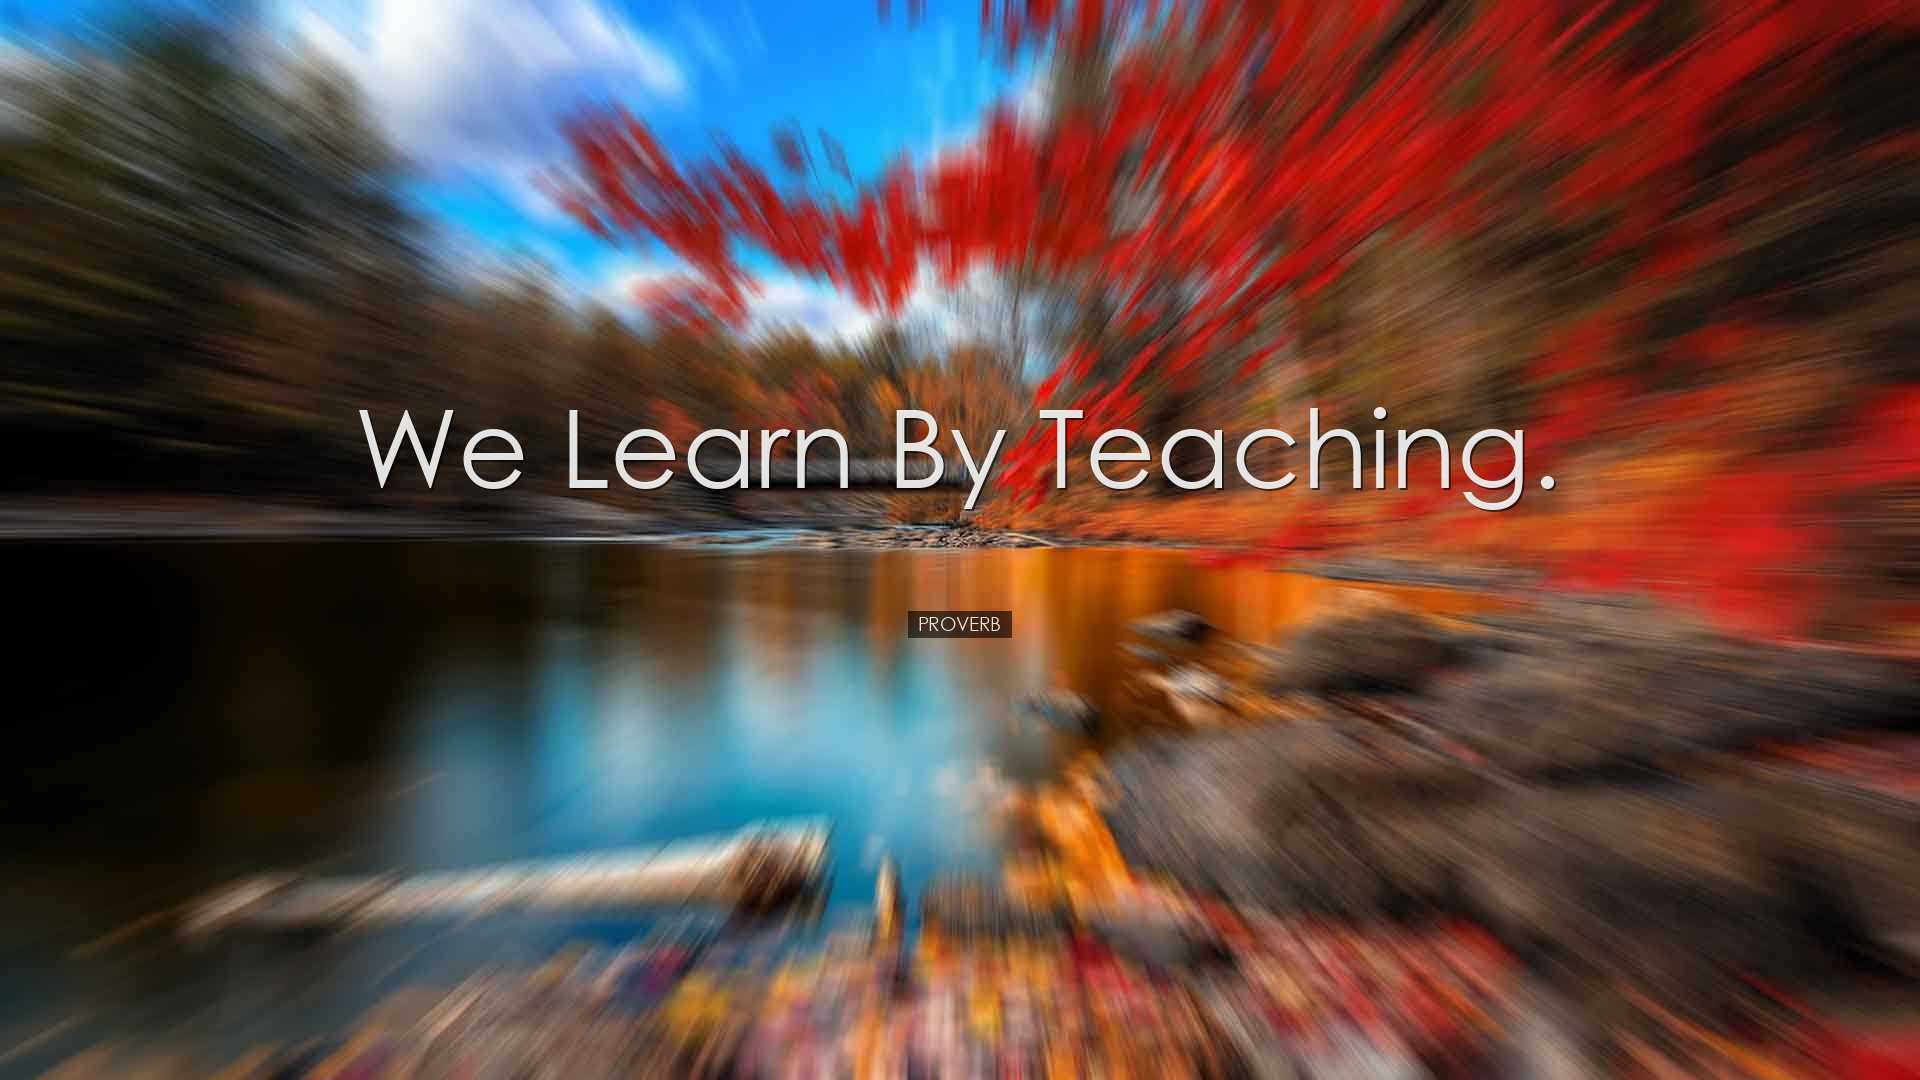 We learn by teaching. - Proverb